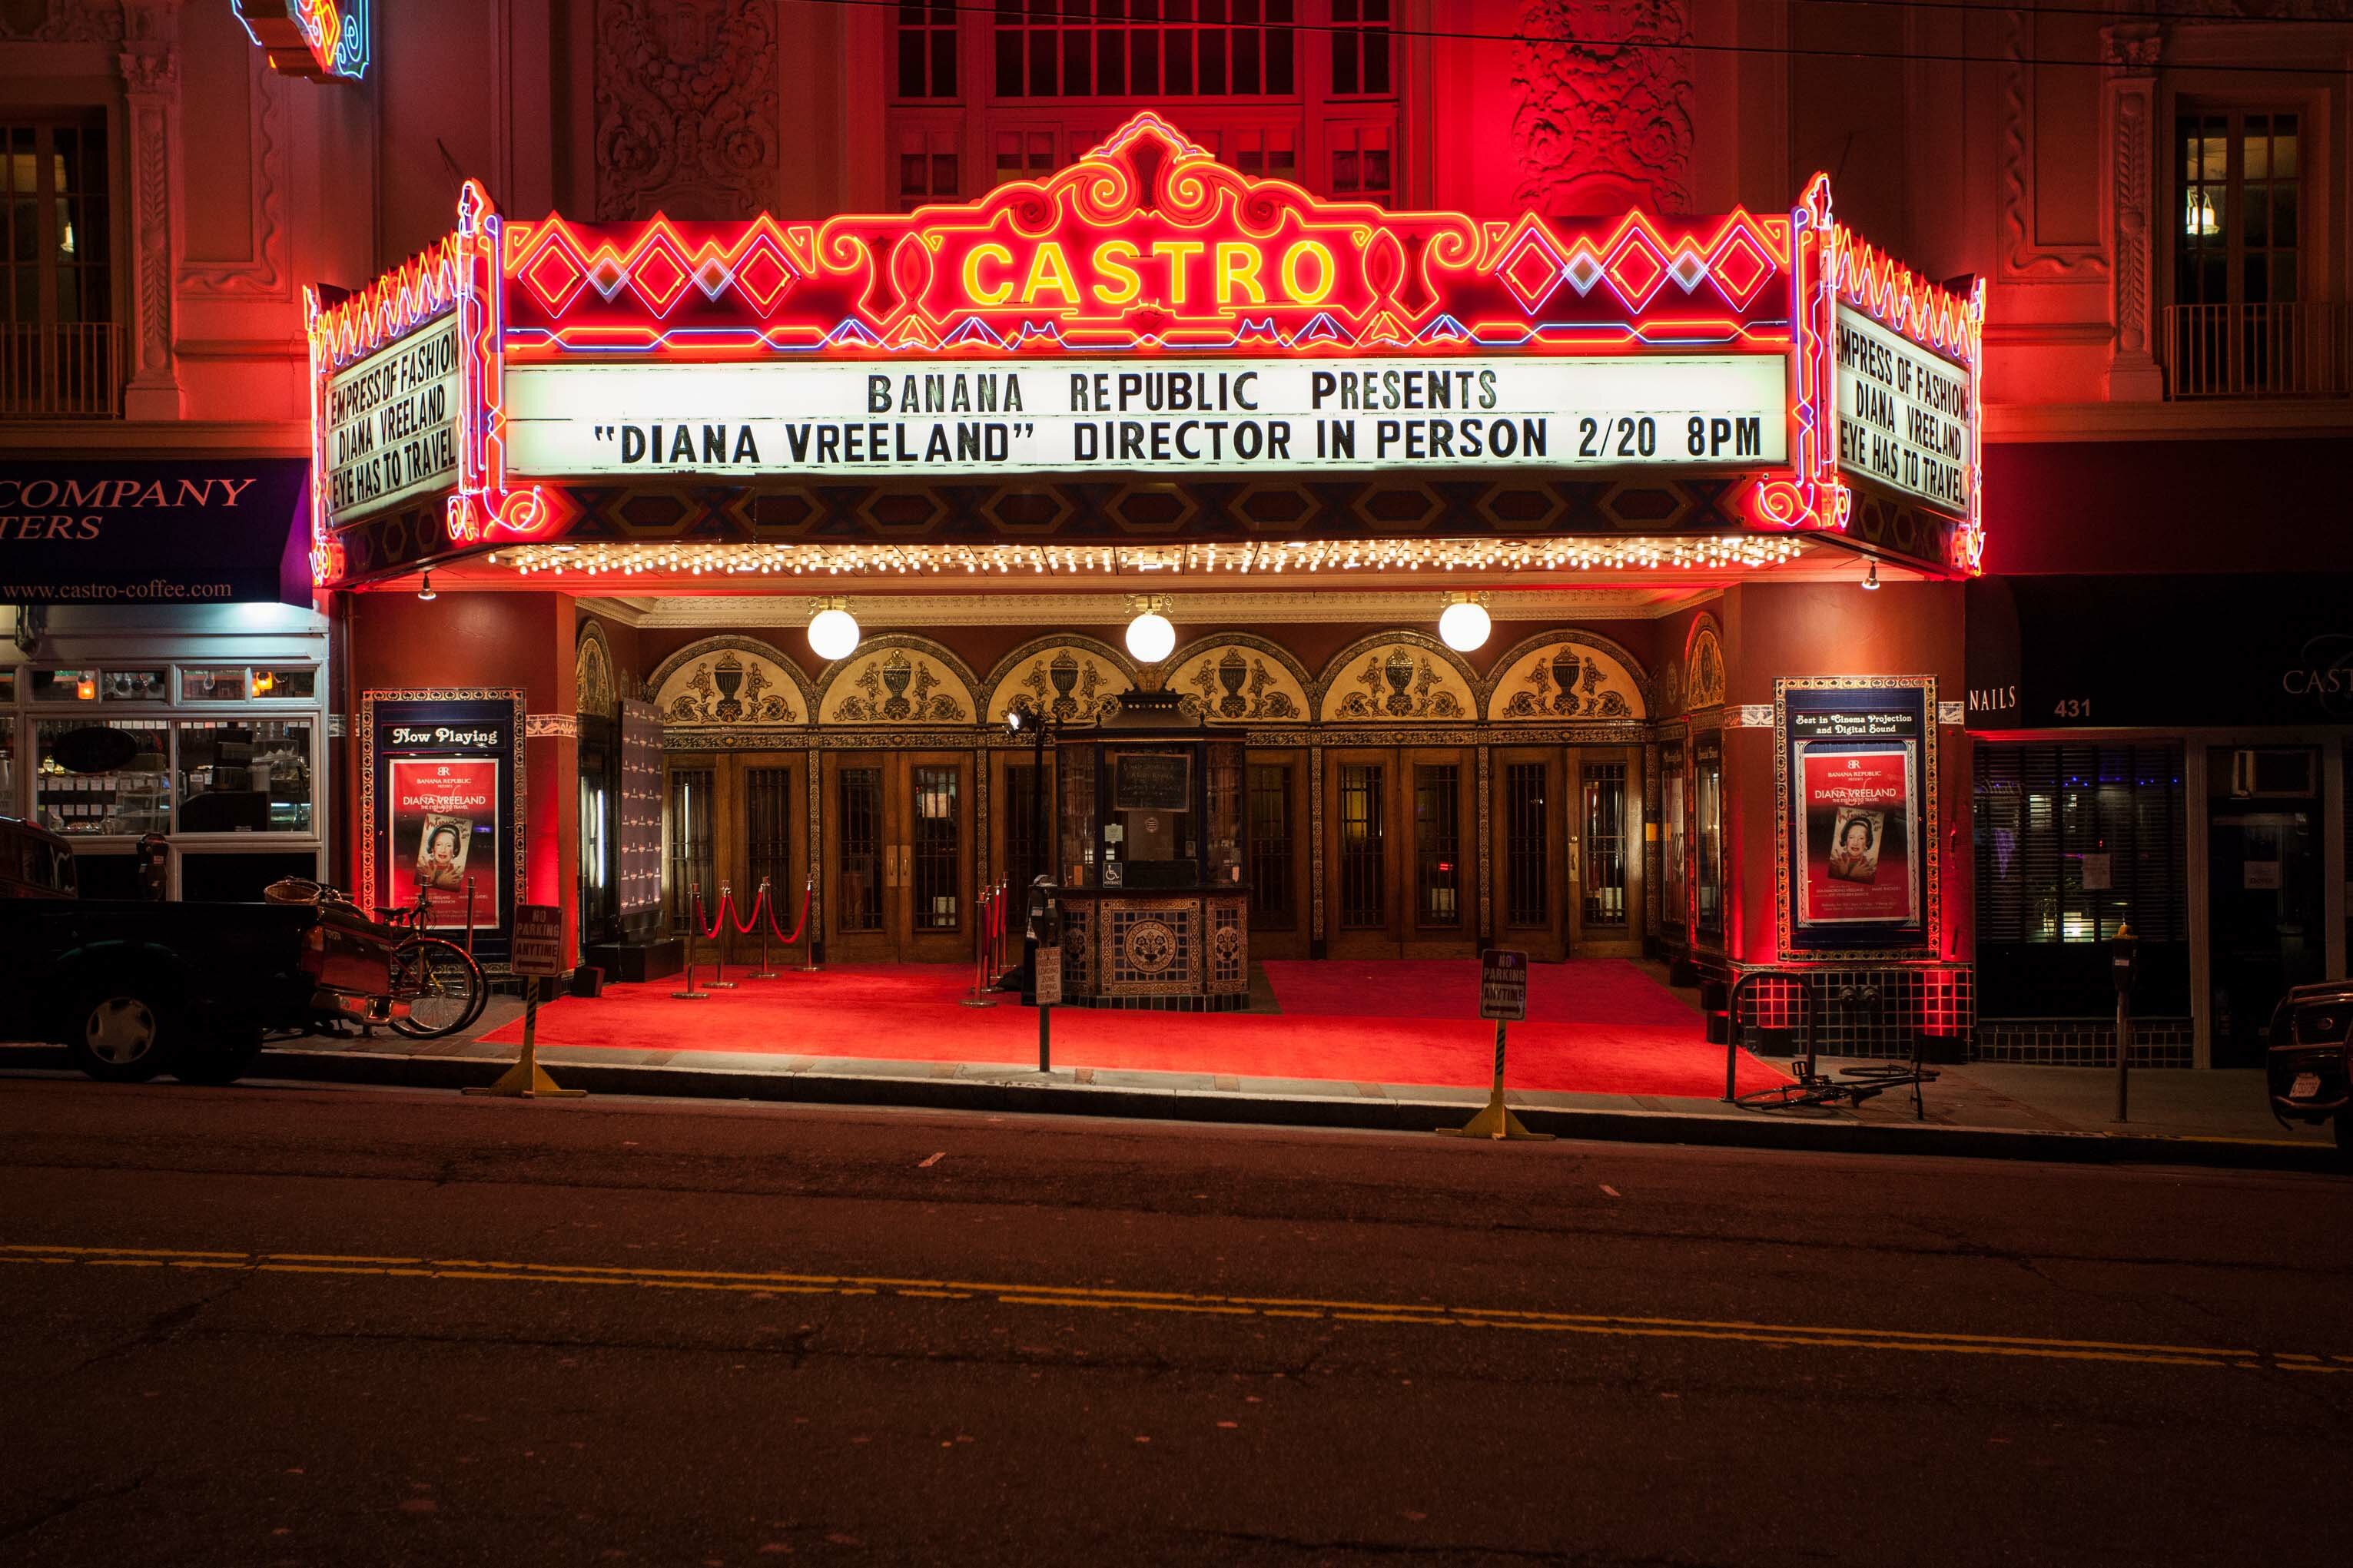 Instead of featuring new releases, San Francisco’s Castro Theatre hosts repertory movies and special screenings, like musicals where the audience is invited to sing along.